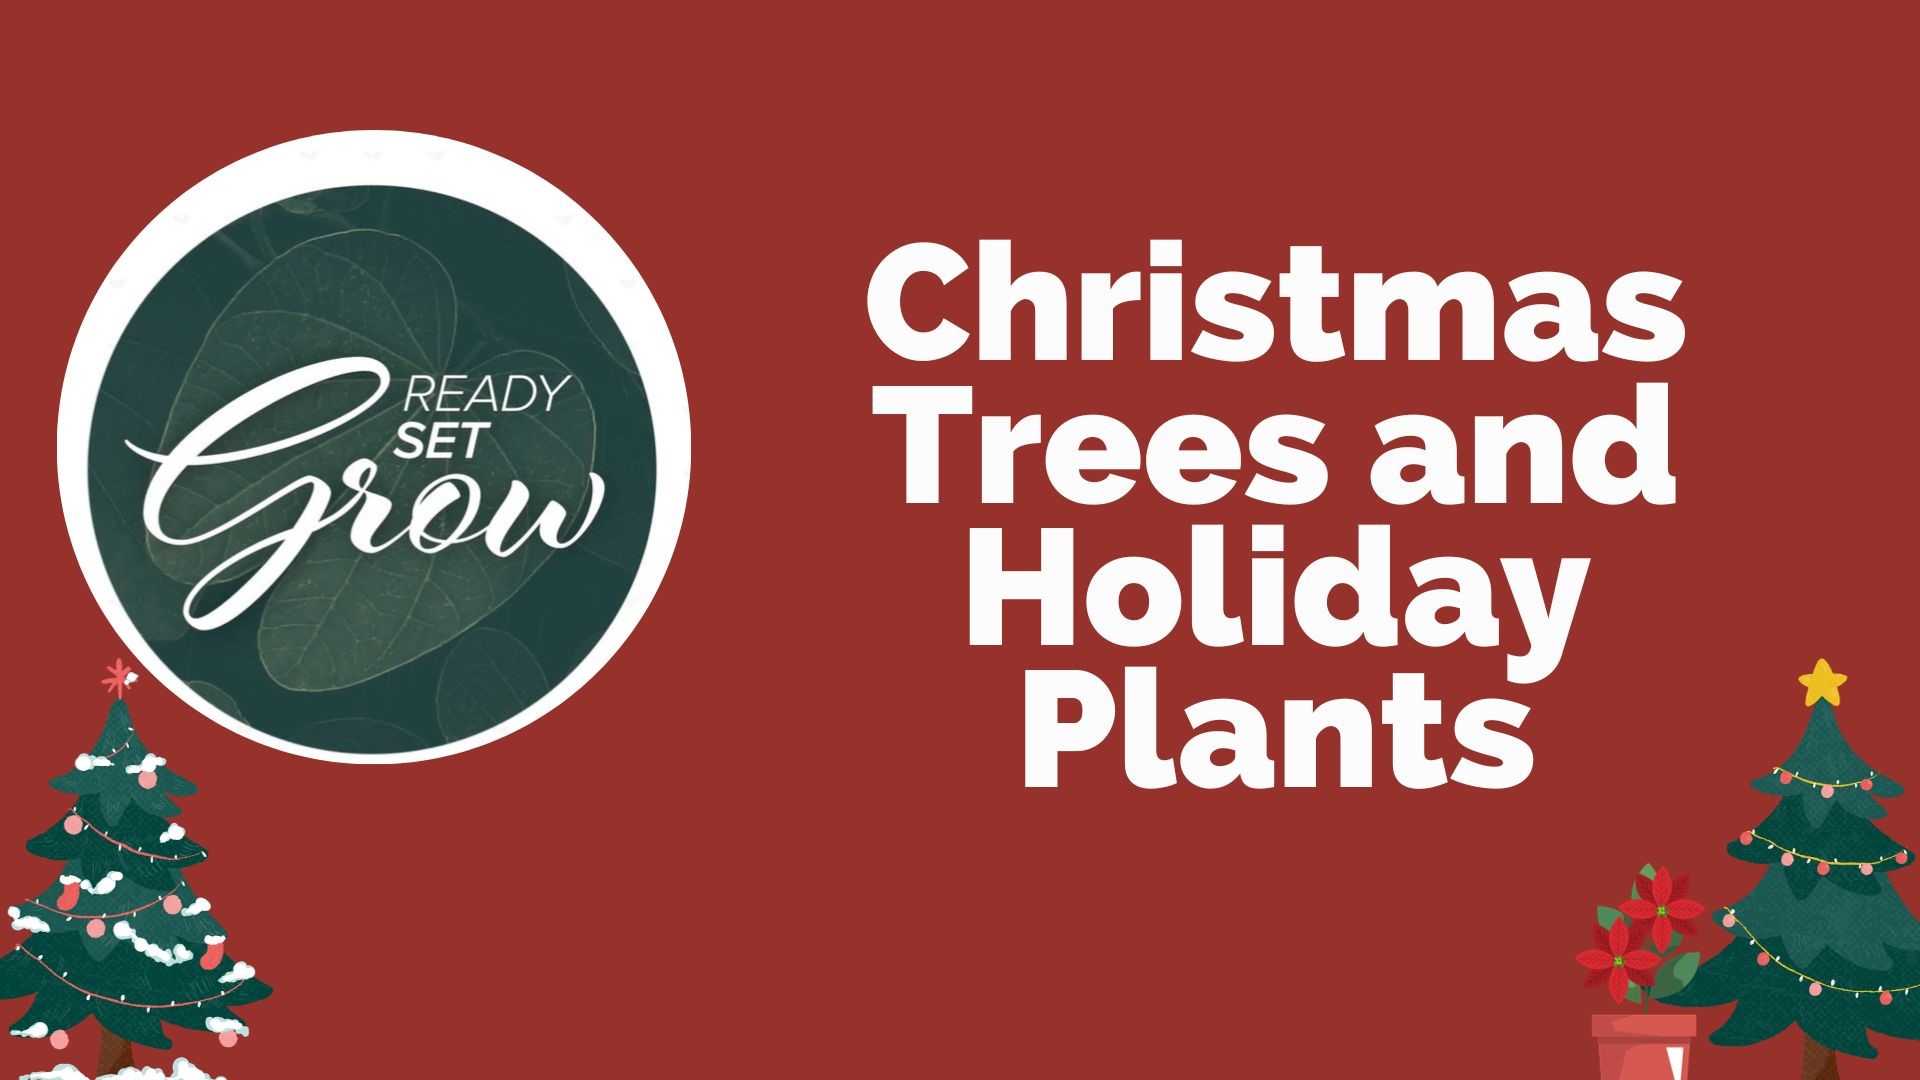 The holidays are here, which means it is time to decorate inside. How to take care of both real and fake trees, plus the perfect indoor plants for the holidays.